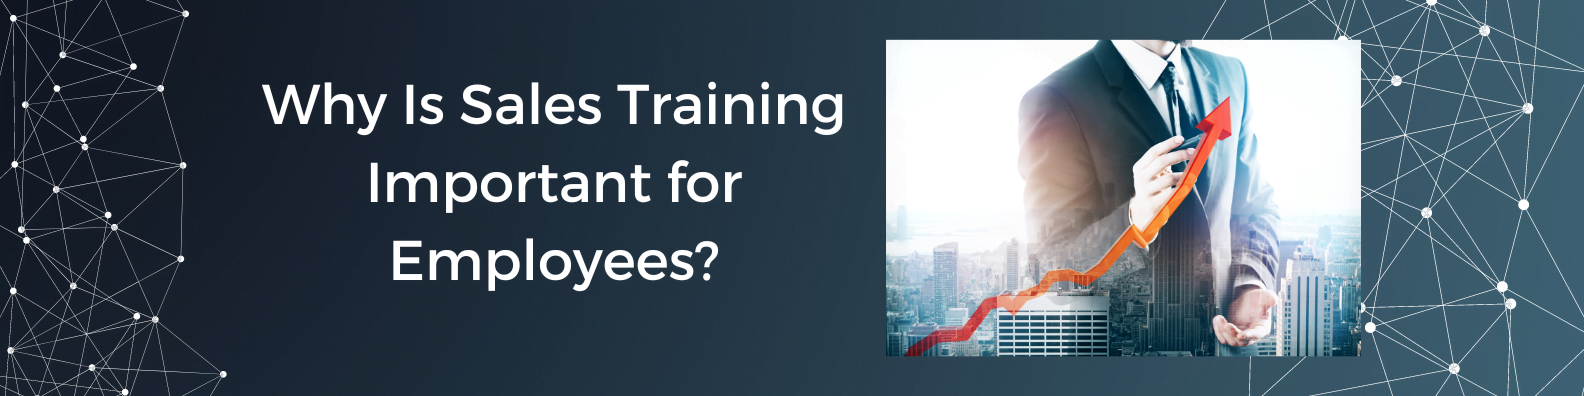 Why Is Sales Training Important for Employees?